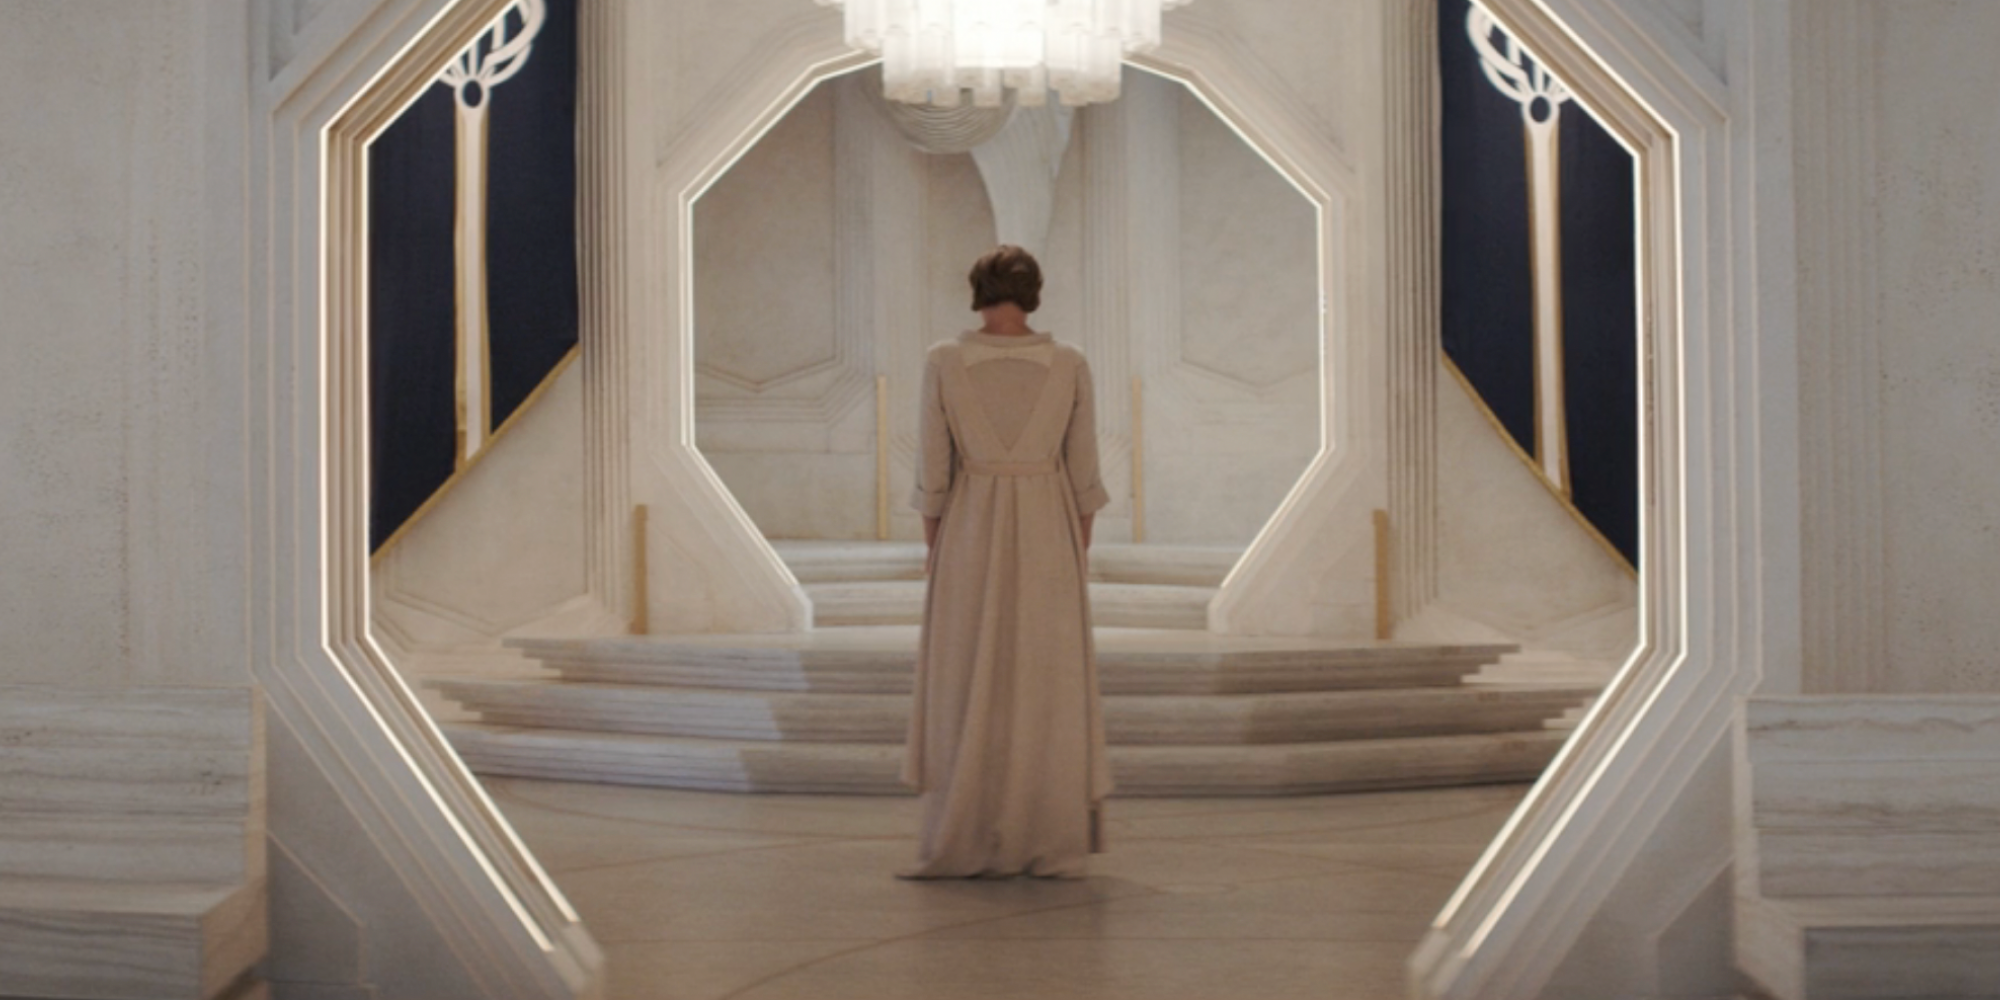 Mon Mothma stands in her apartment in Andor Episode 9.